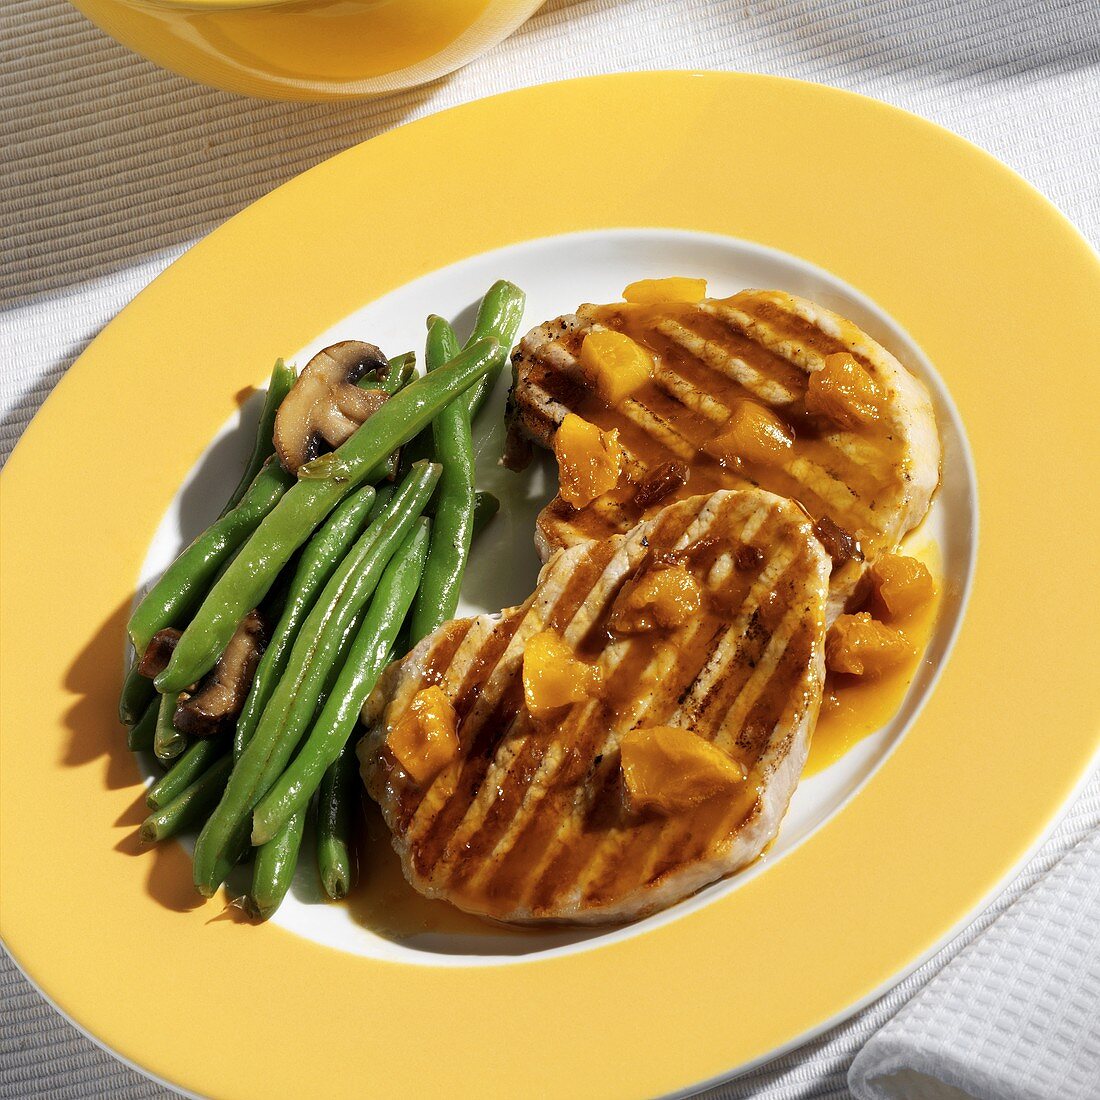 Pork chops with dried fruit, green beans and mushrooms